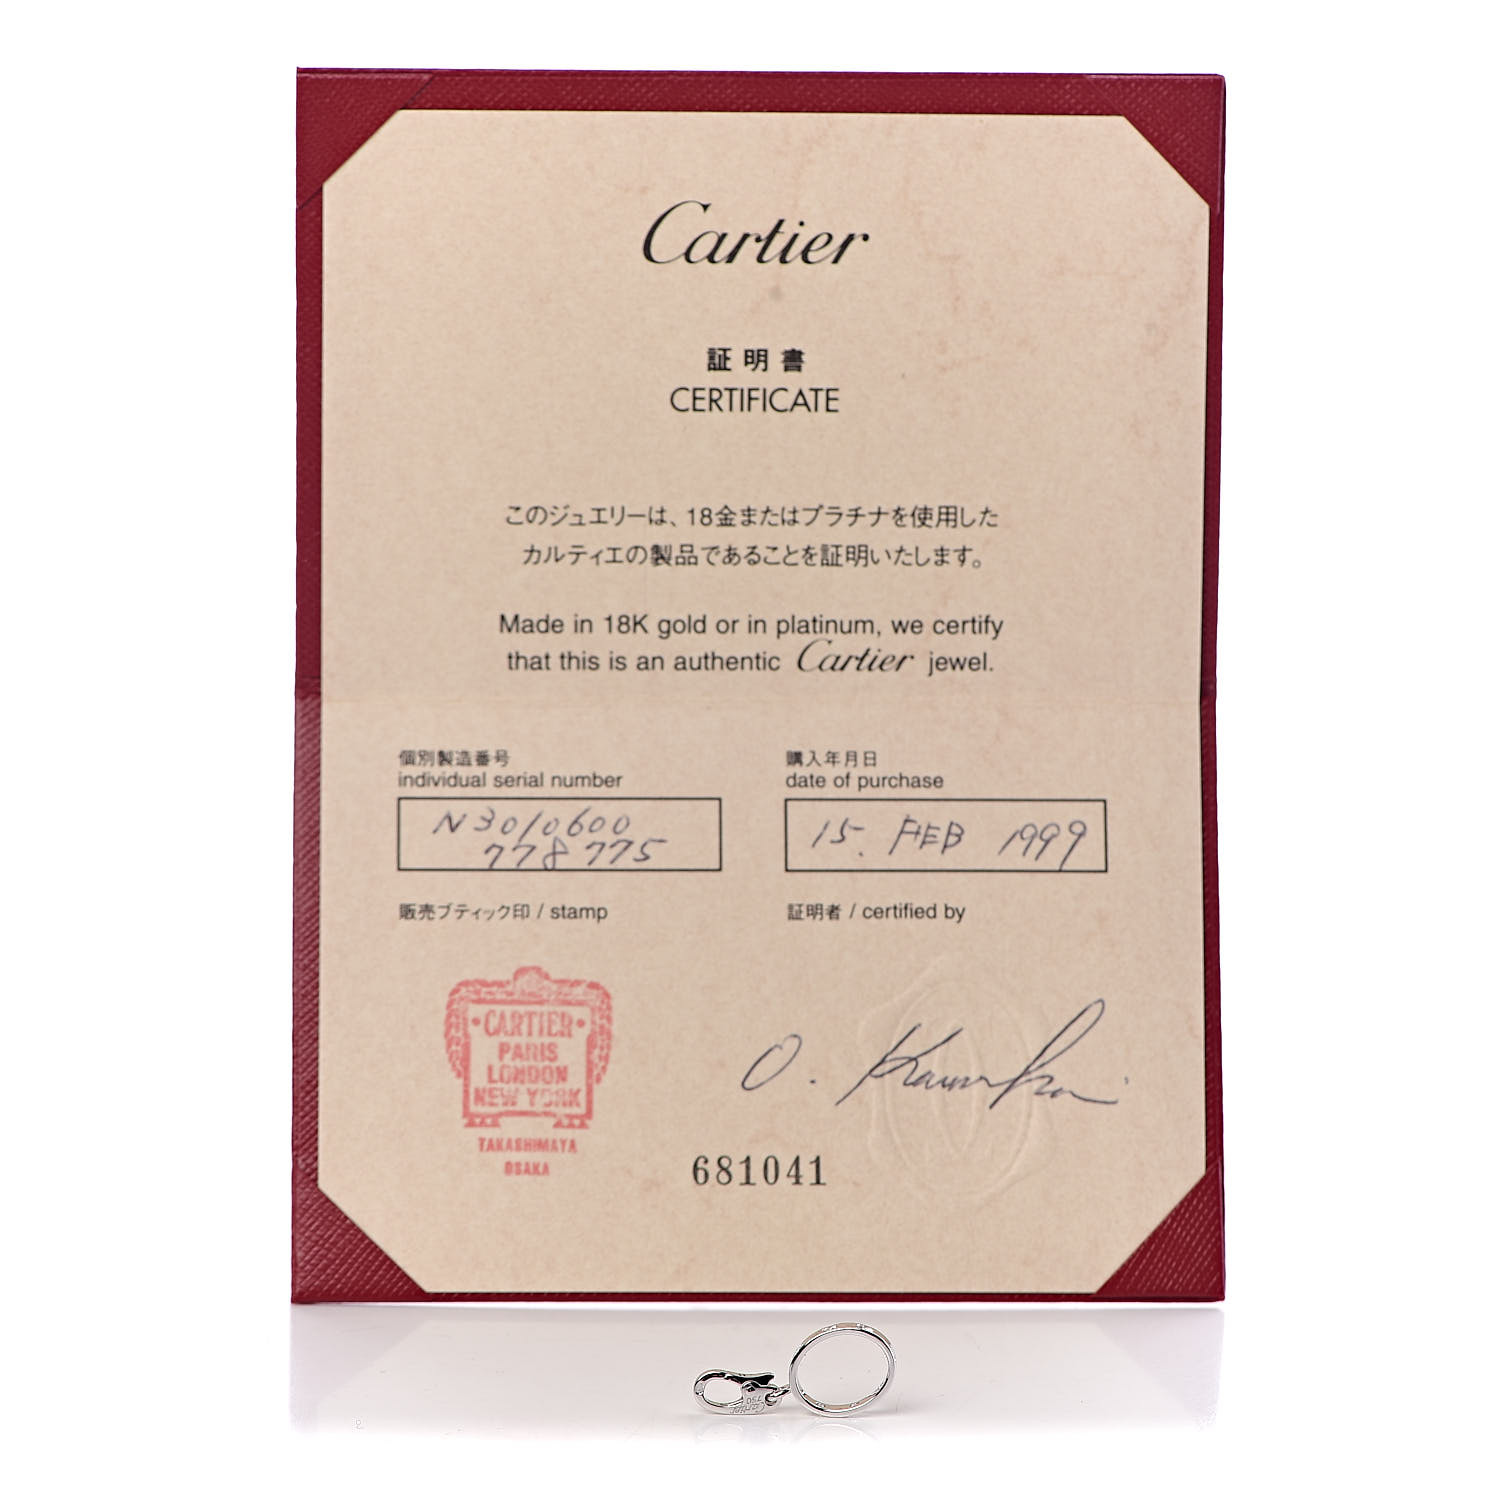 cartier love ring certificate of authenticity